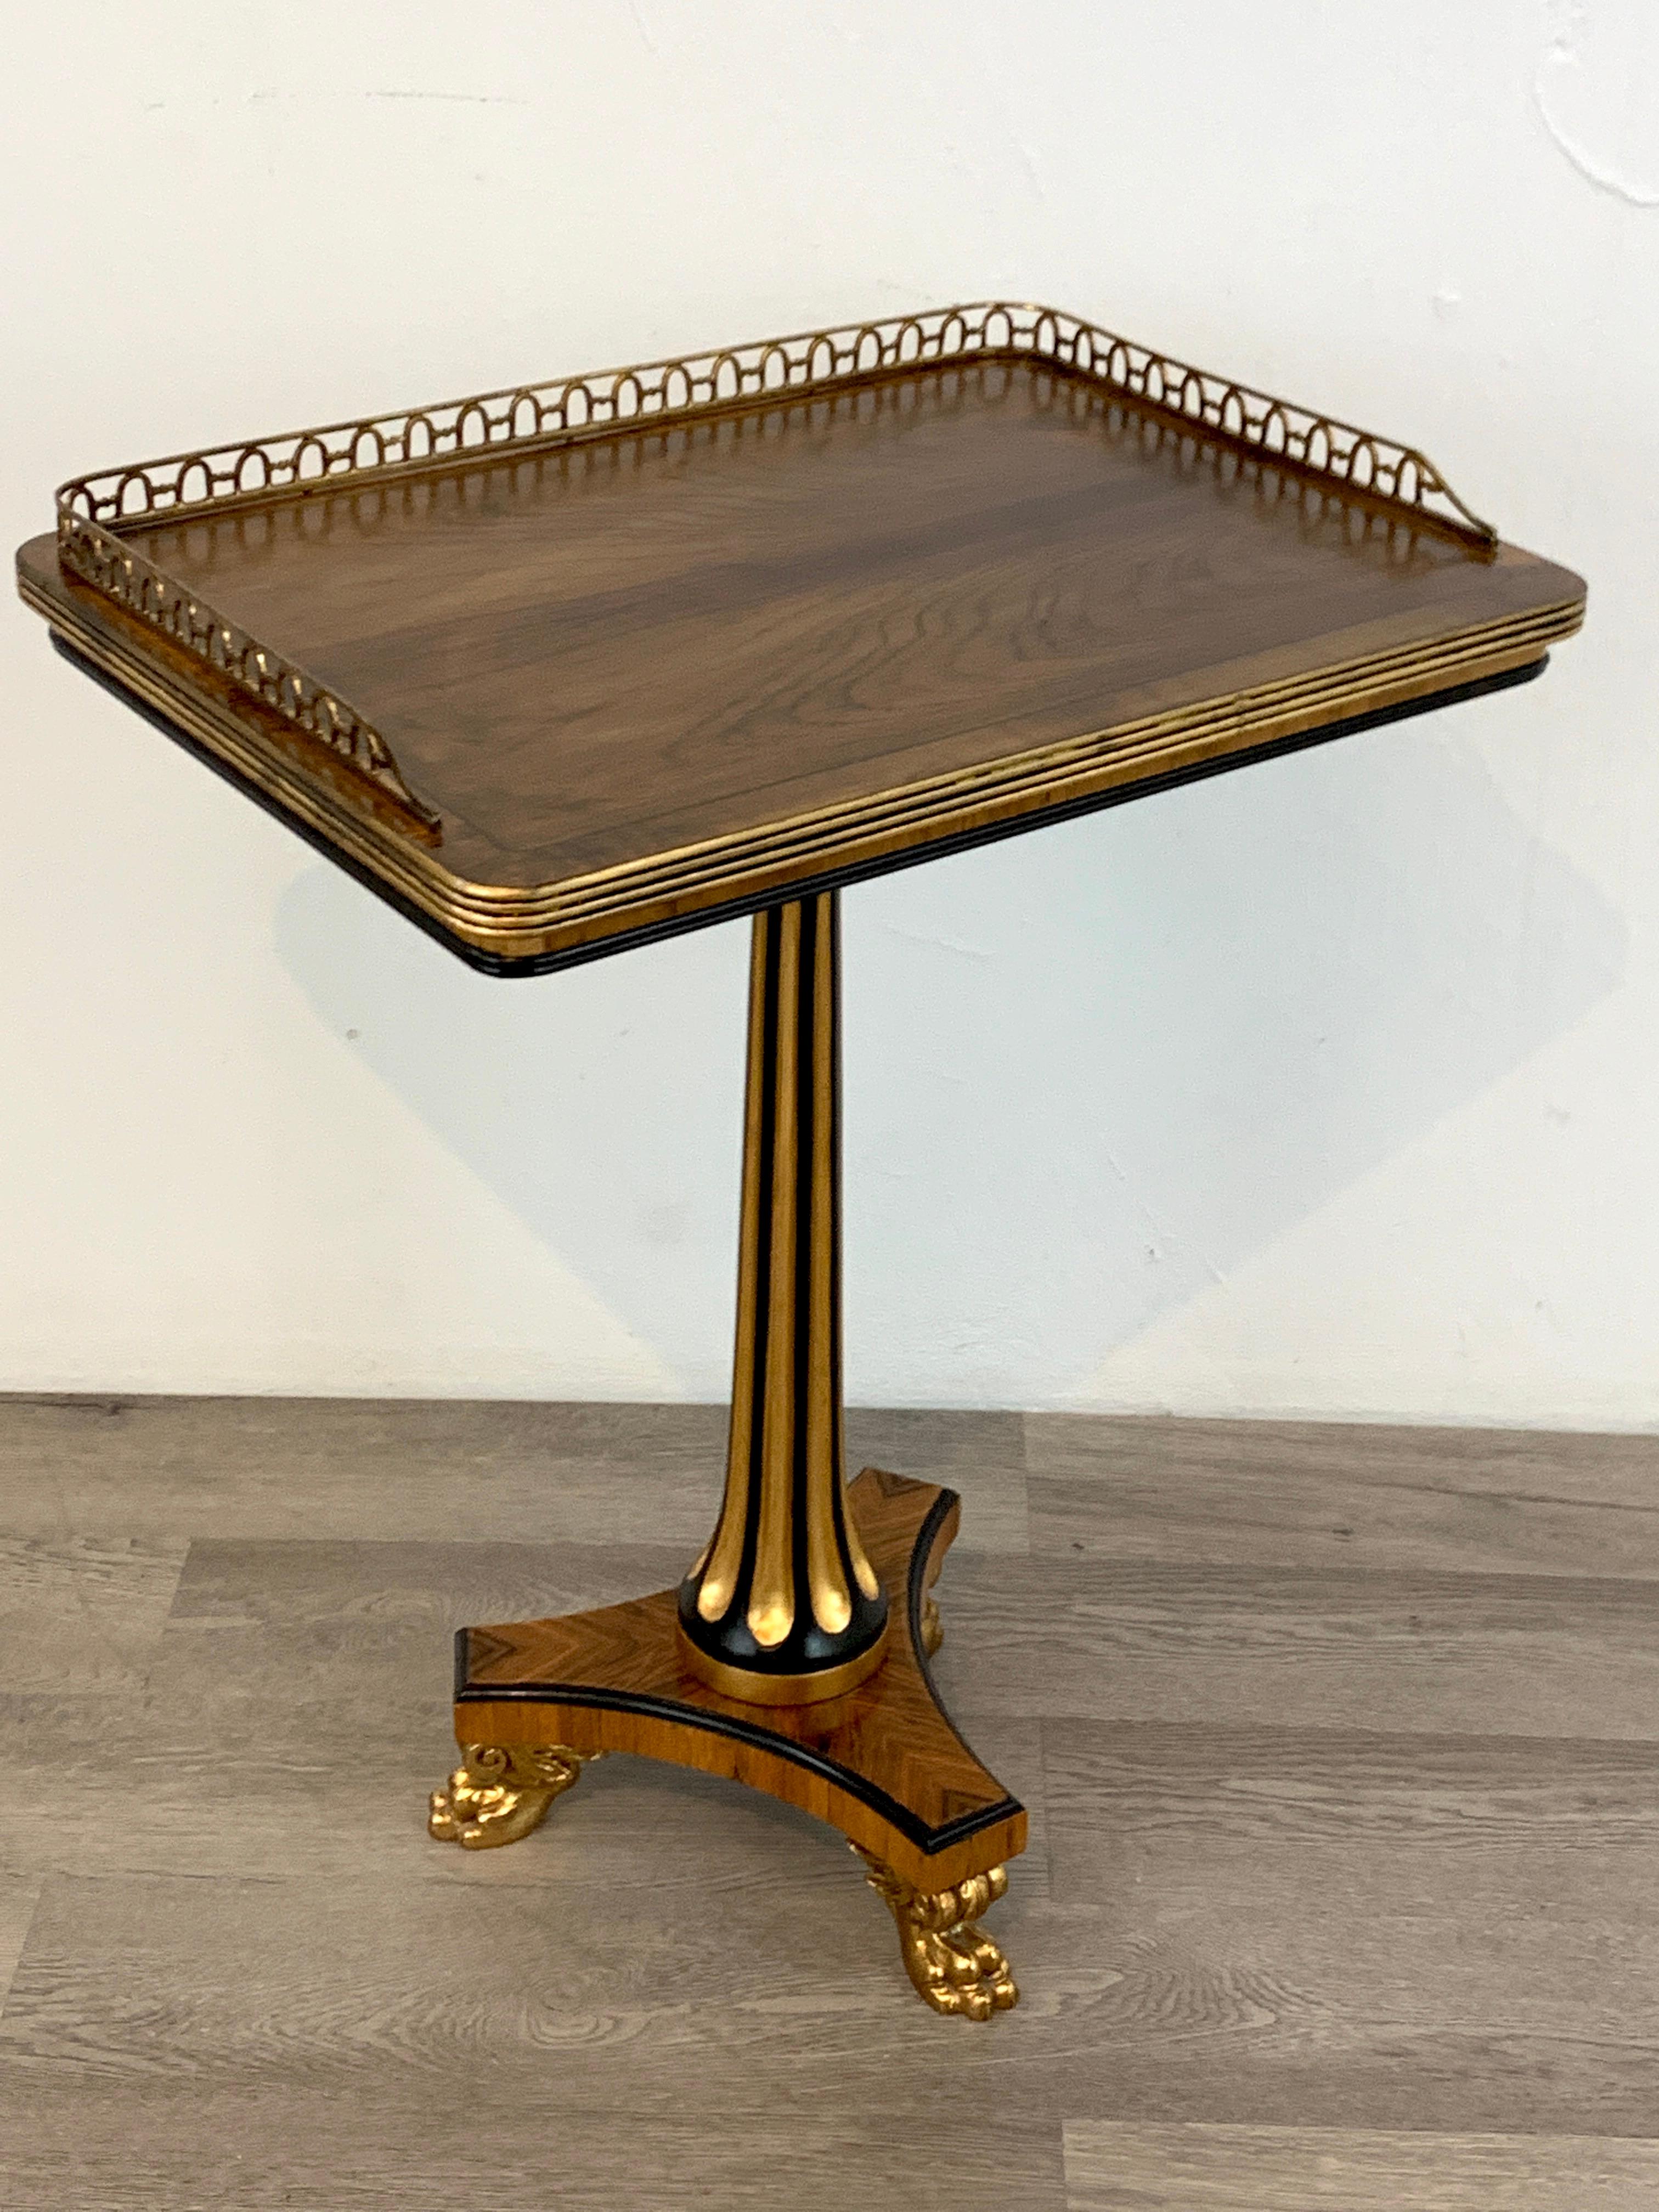 Polychromed Stunning Regency Style Gilt Bronze Side Table, Althorp, by Theo Alexander For Sale